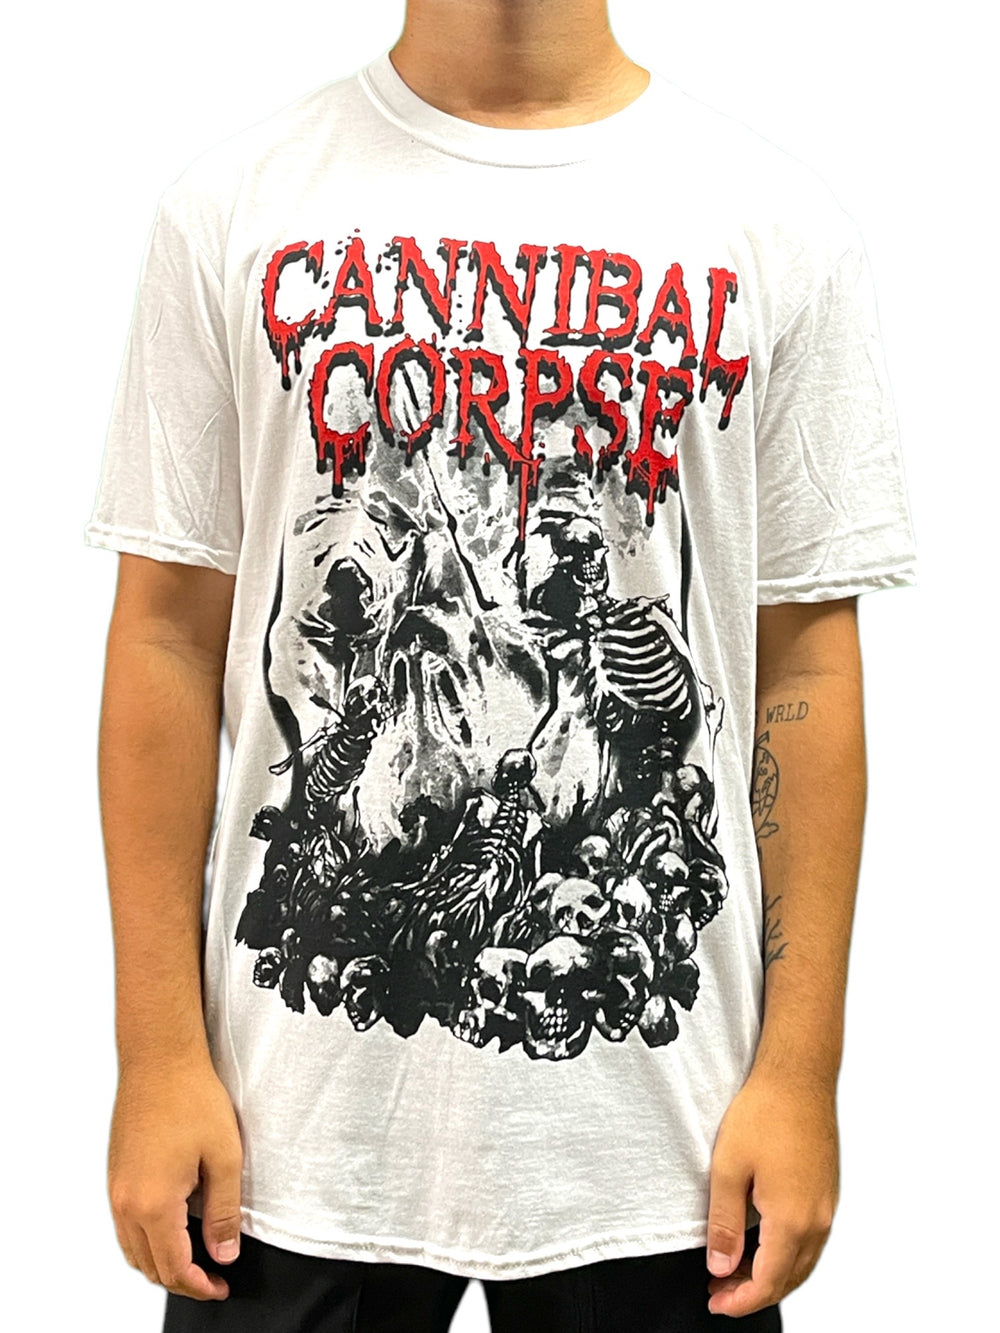 Cannibal Corpse Pile Of Skulls White Unisex Official T Shirt Brand New Various Sizes